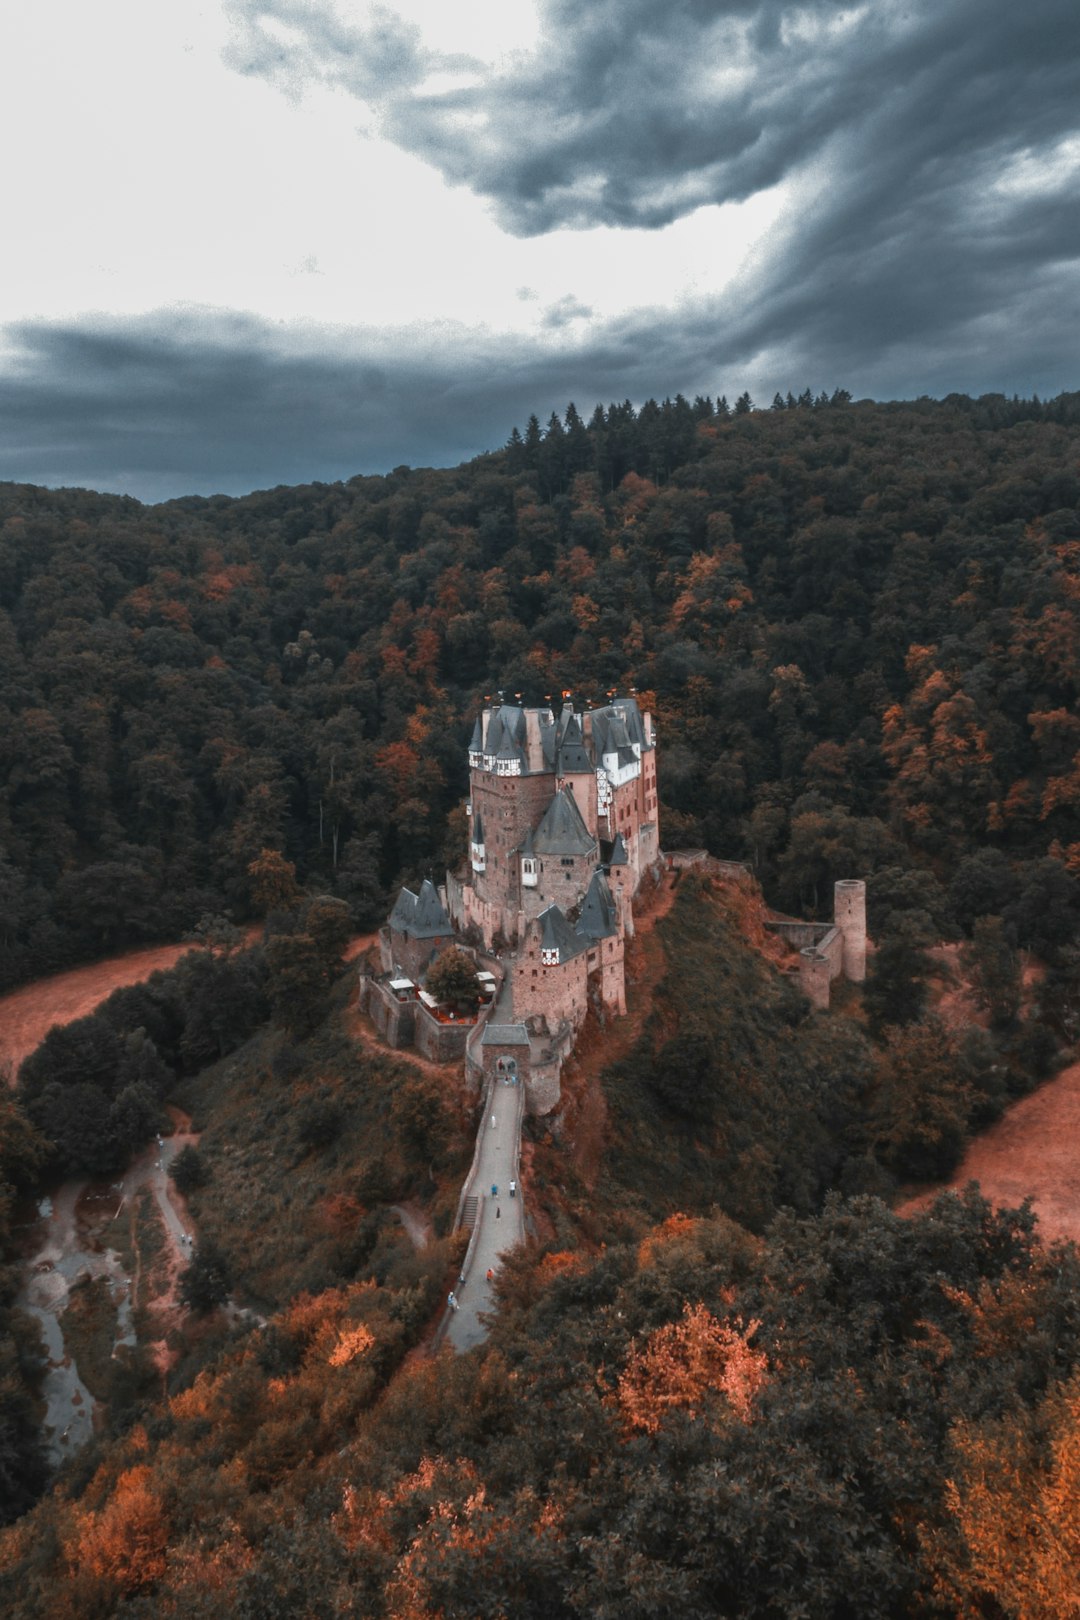 Travel Tips and Stories of Eltz Castle in Germany